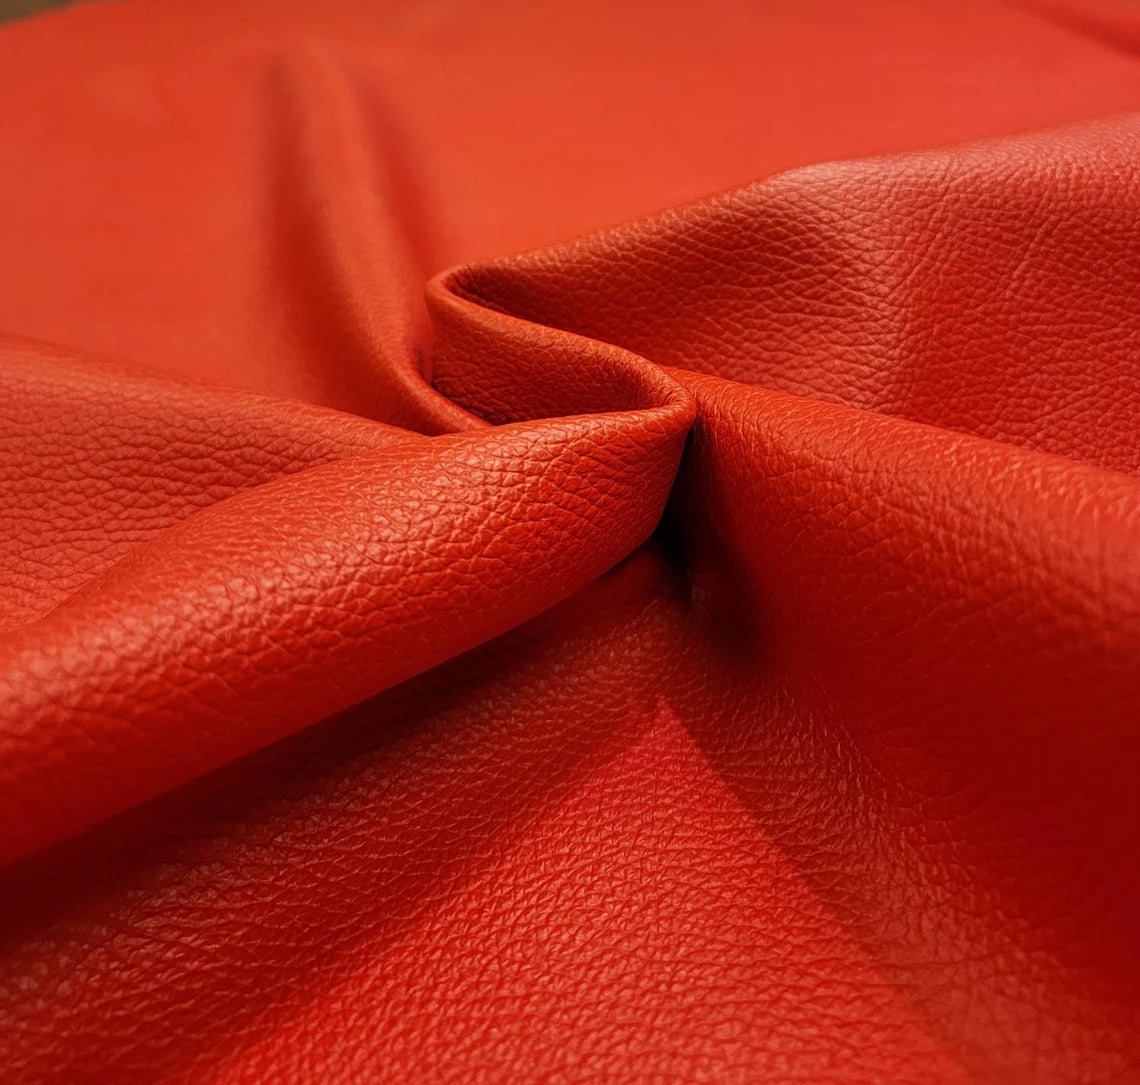 Premium Quality Tangerine Orangish Red Full Grain Naturally Milled Italian Cowhide Leather for Upholstery 37 Sqft